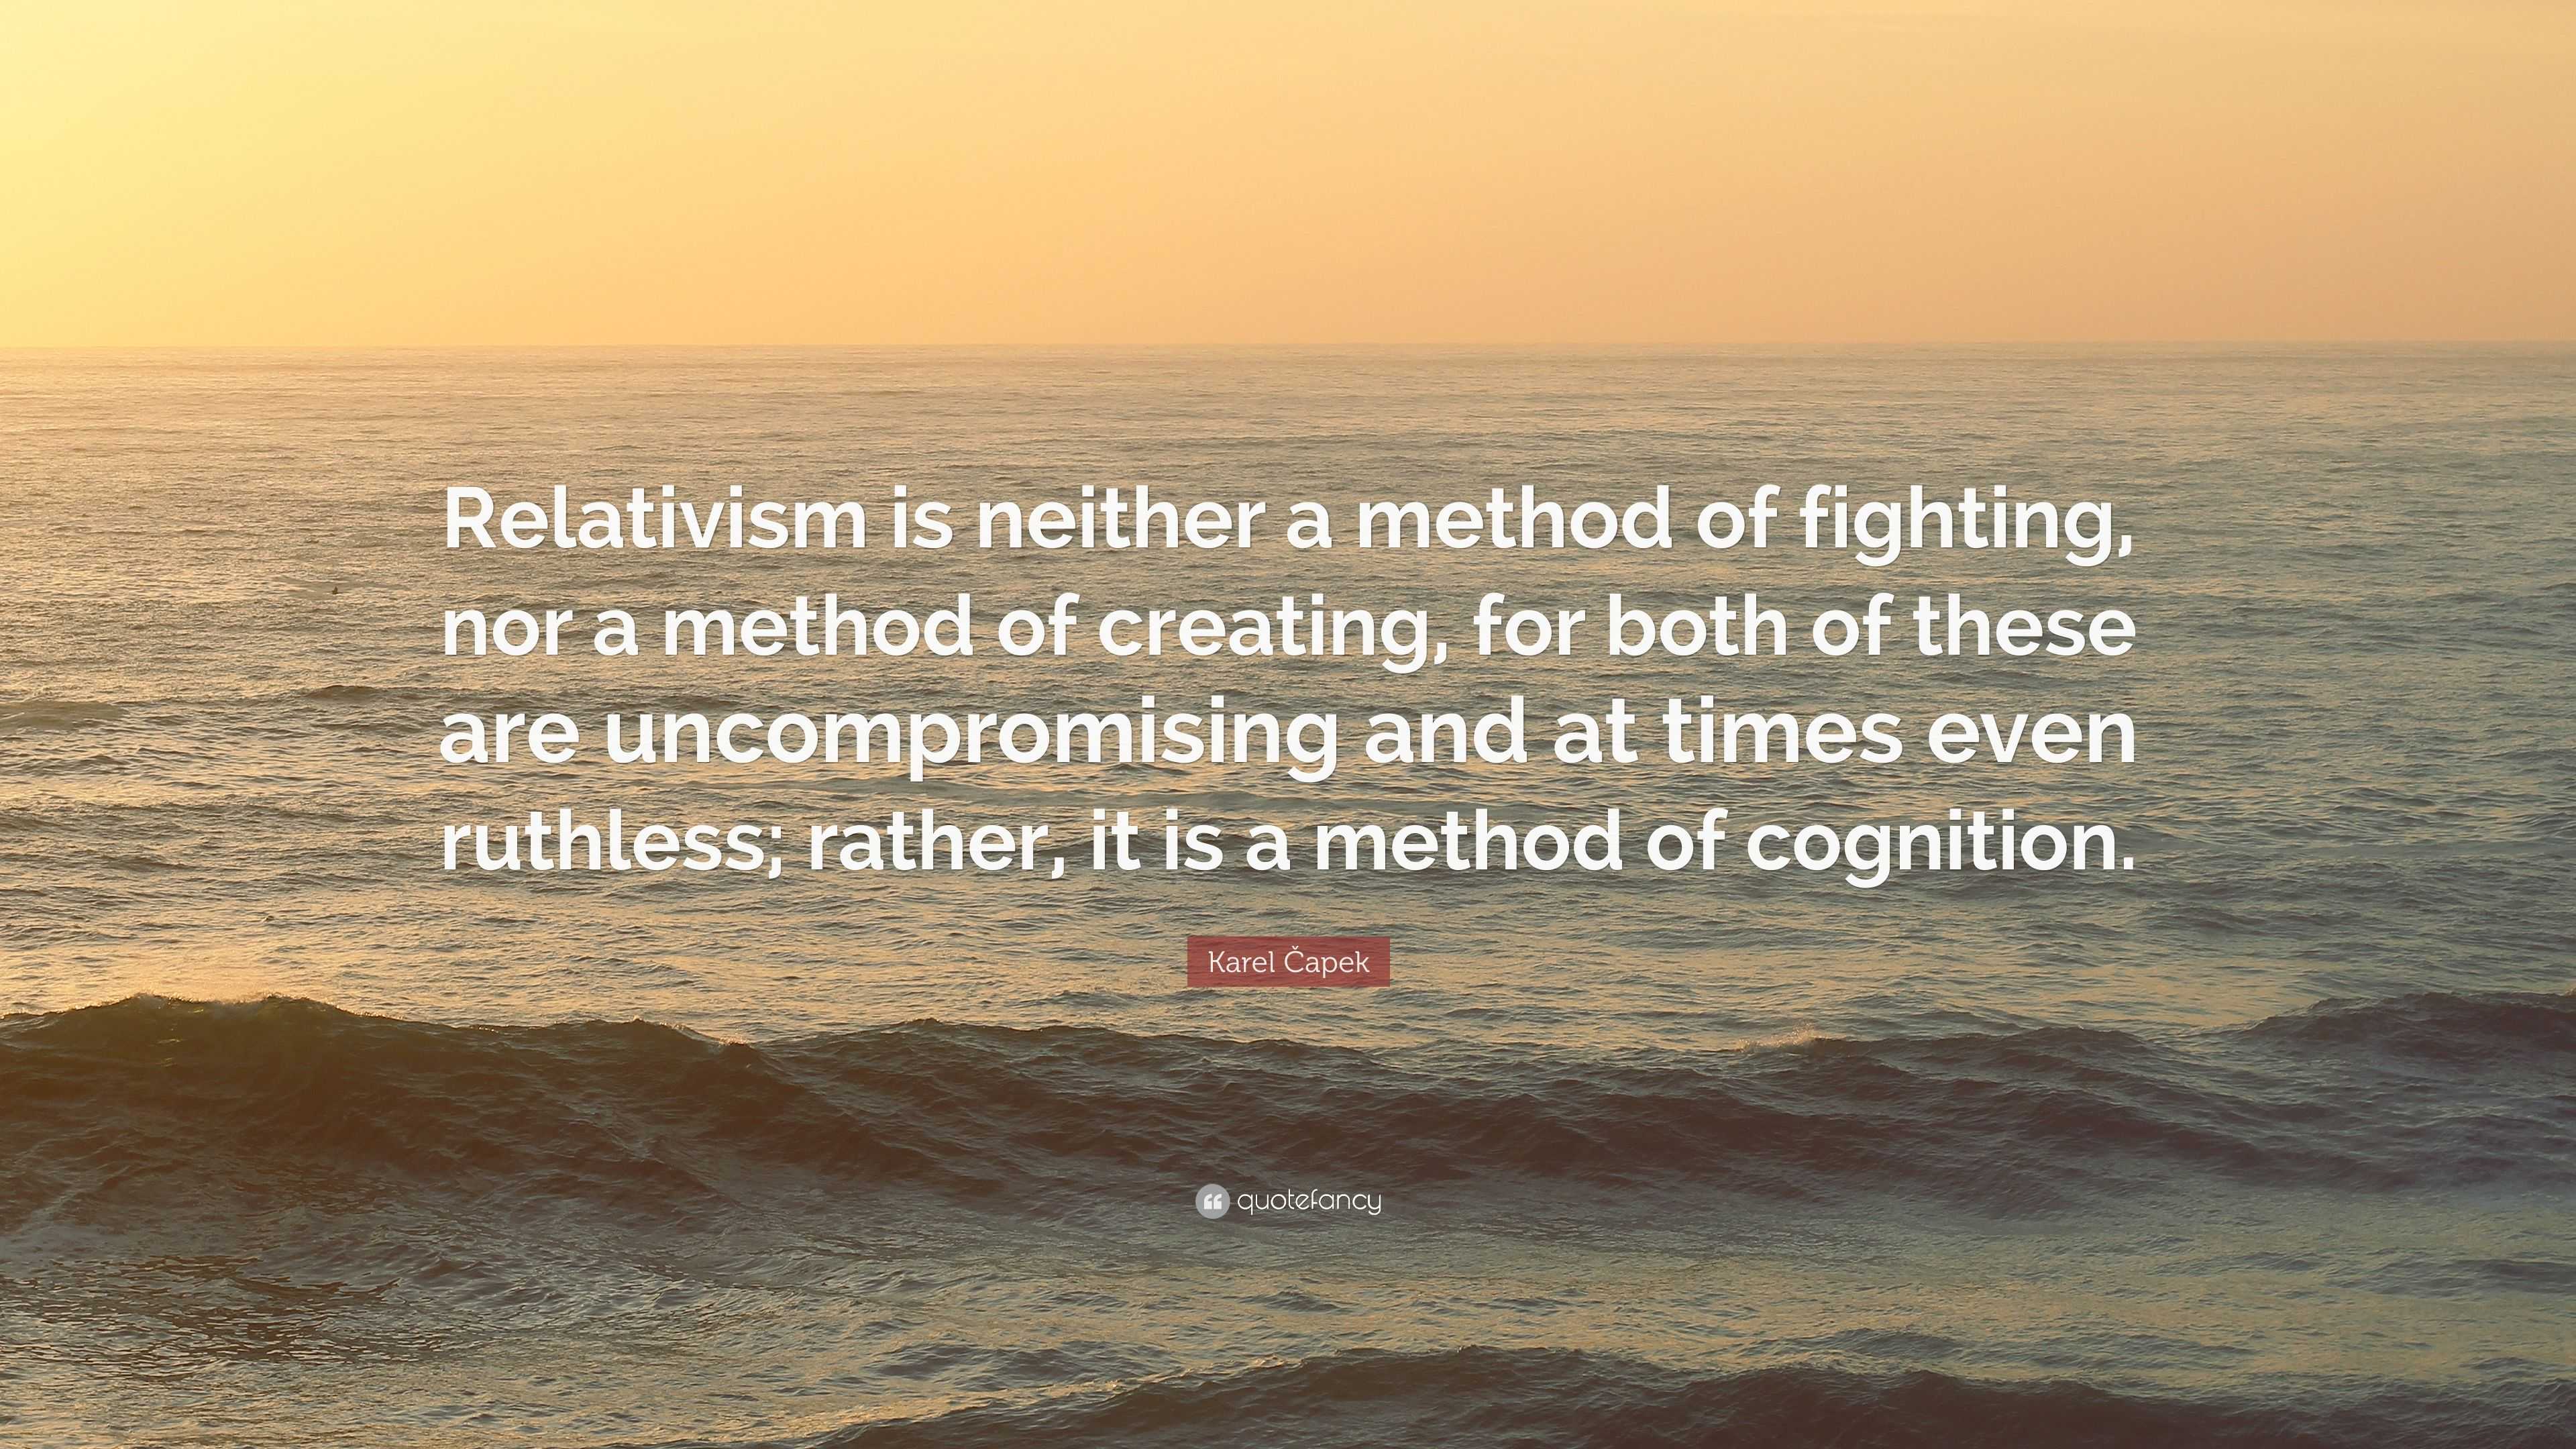 Karel Čapek Quote: “Relativism is neither a method of fighting, nor a ...